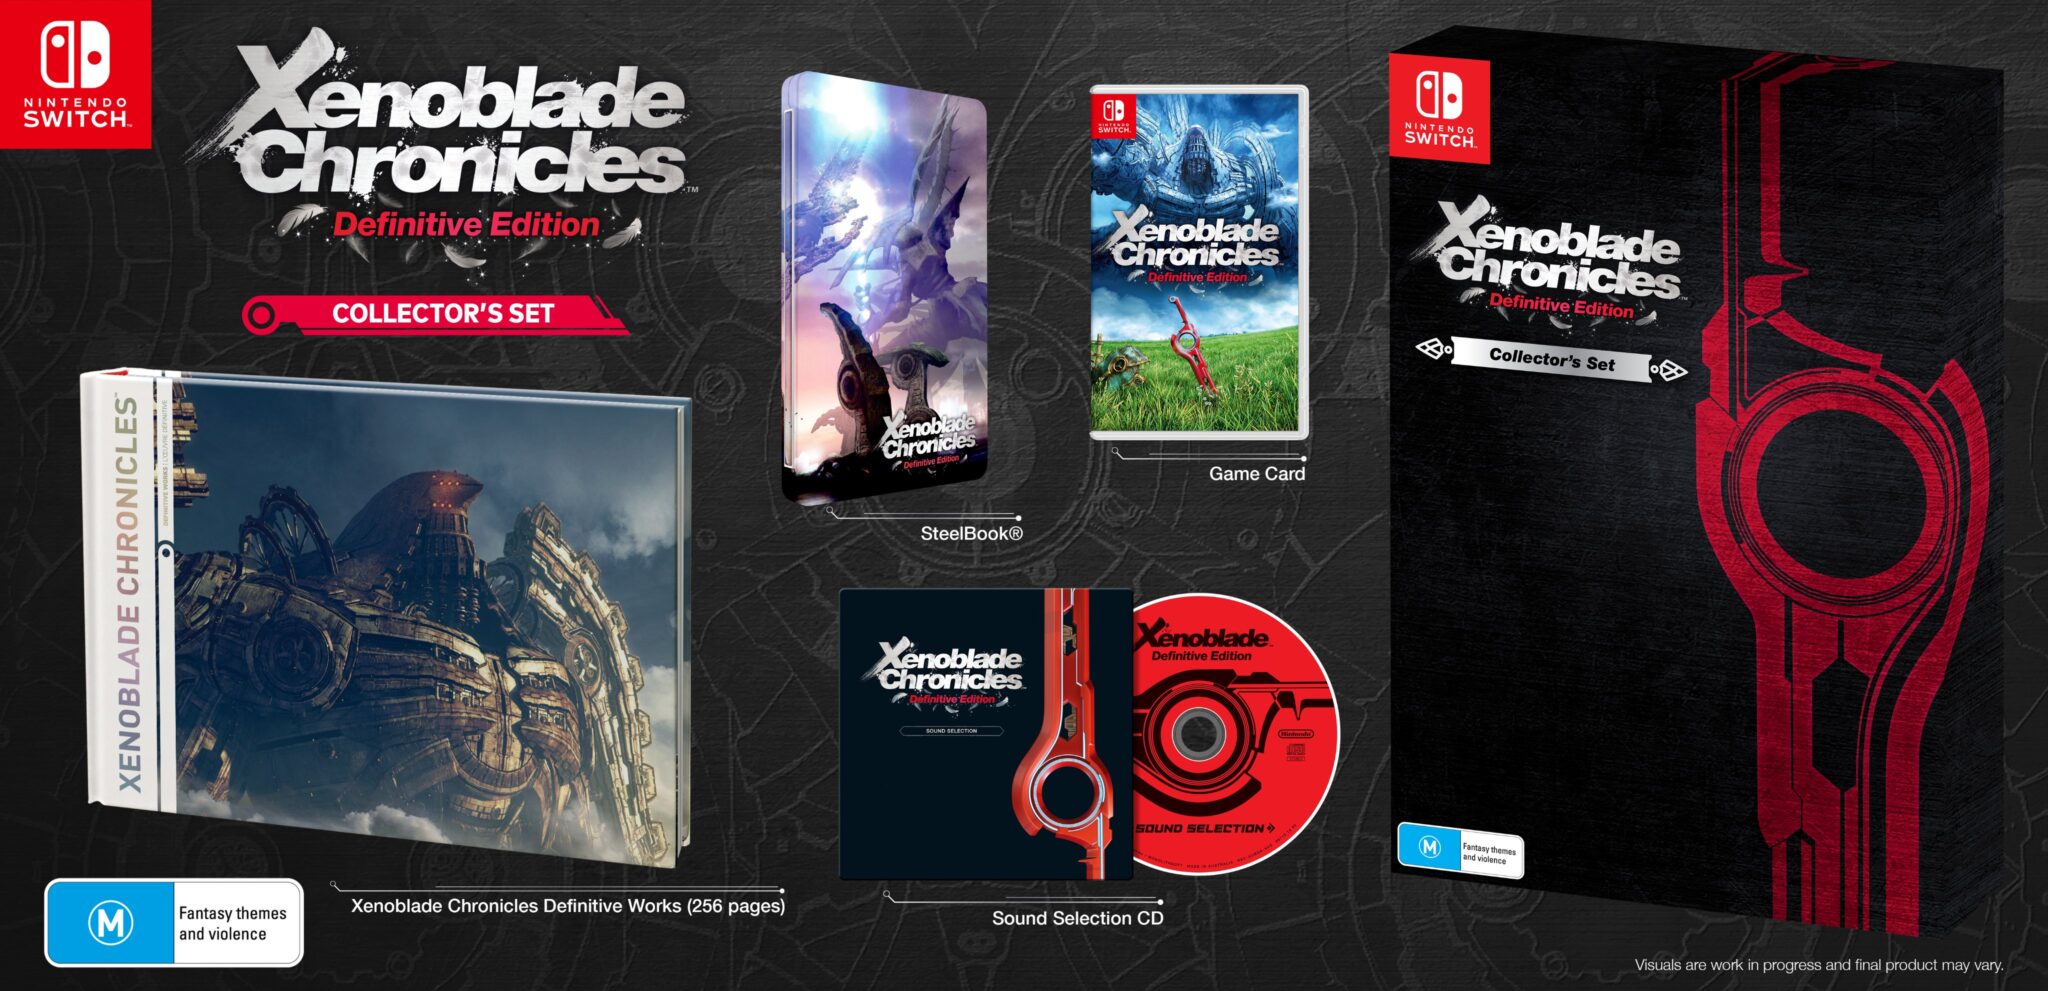 Xenoblade Chronicles Definitive Edition Collector's Set confirmed for